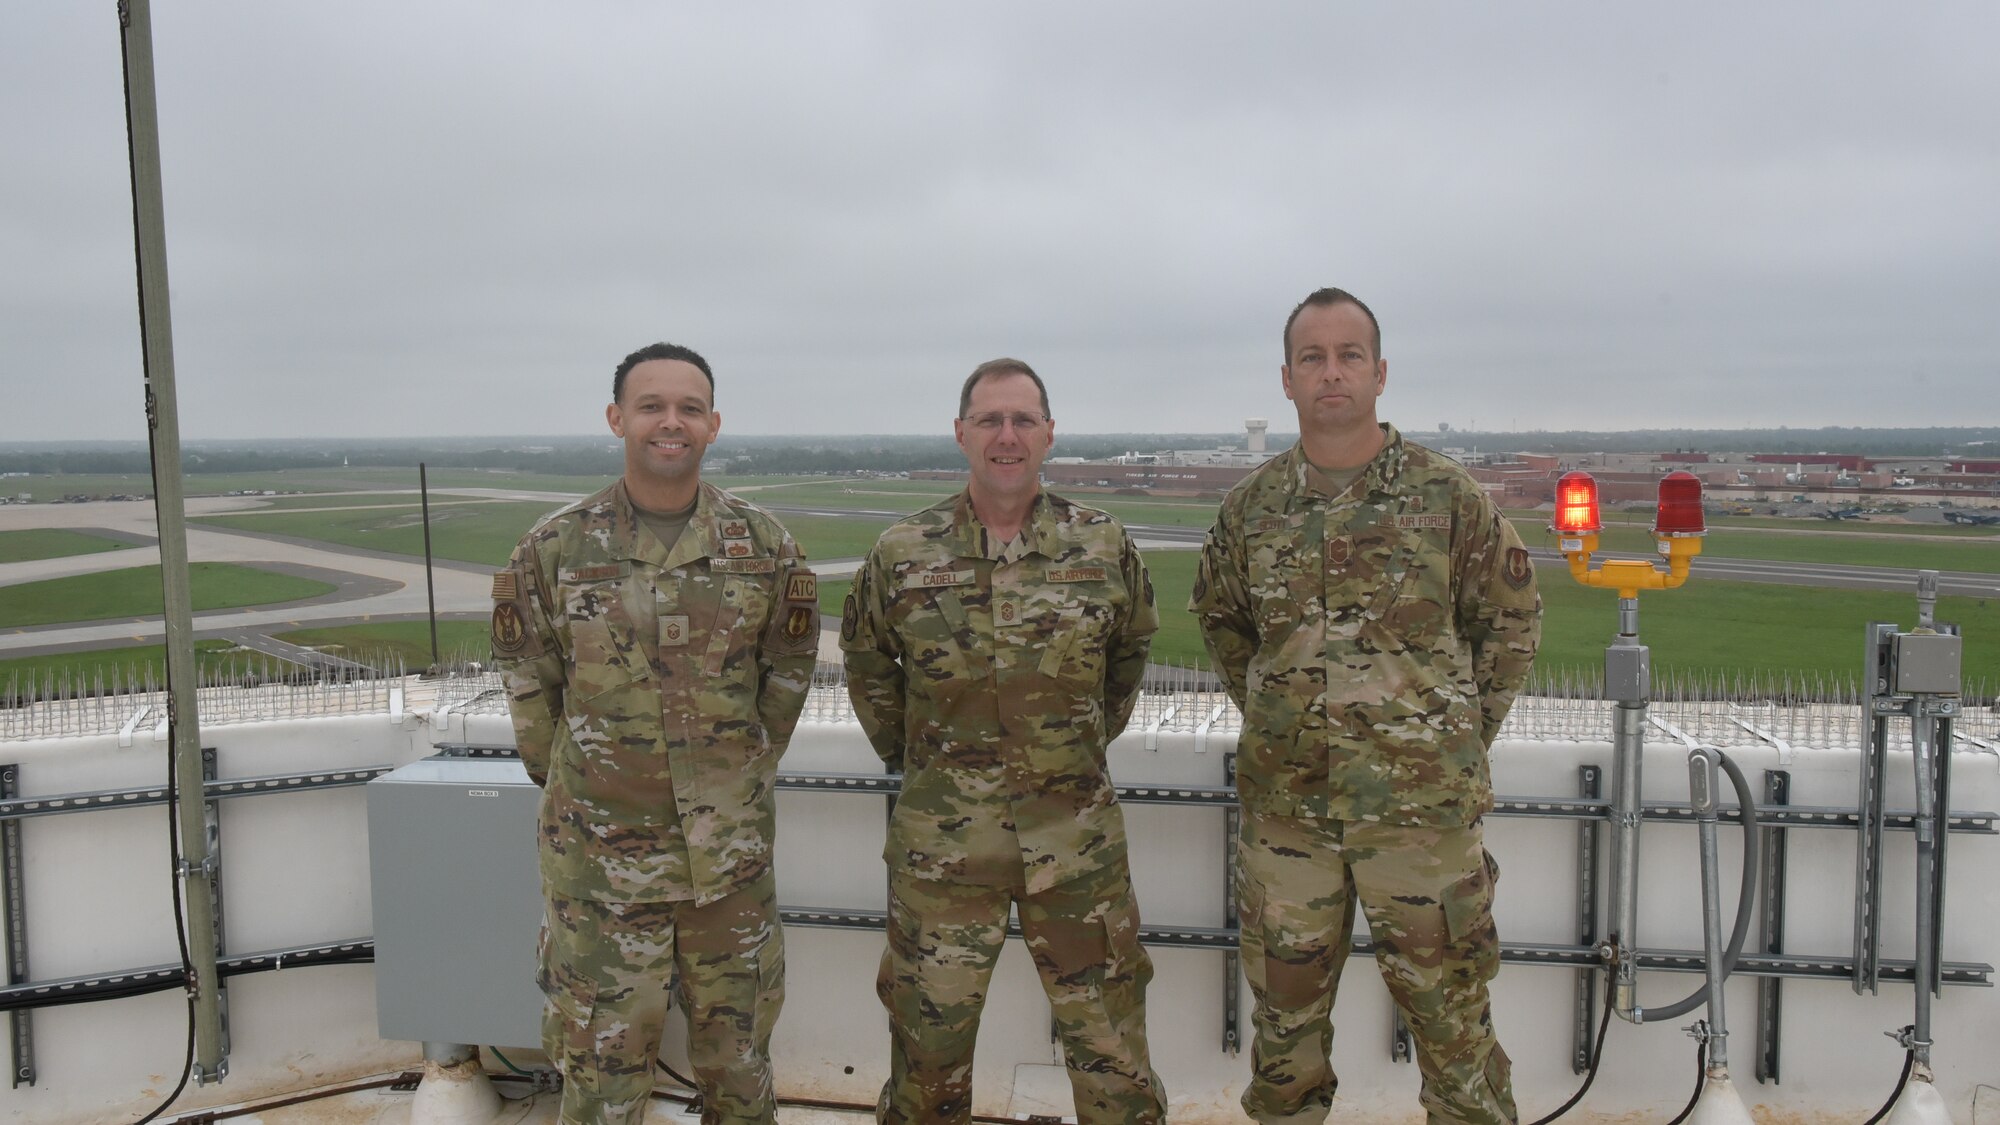 Three Airmen standing on top of air traffic control tower.